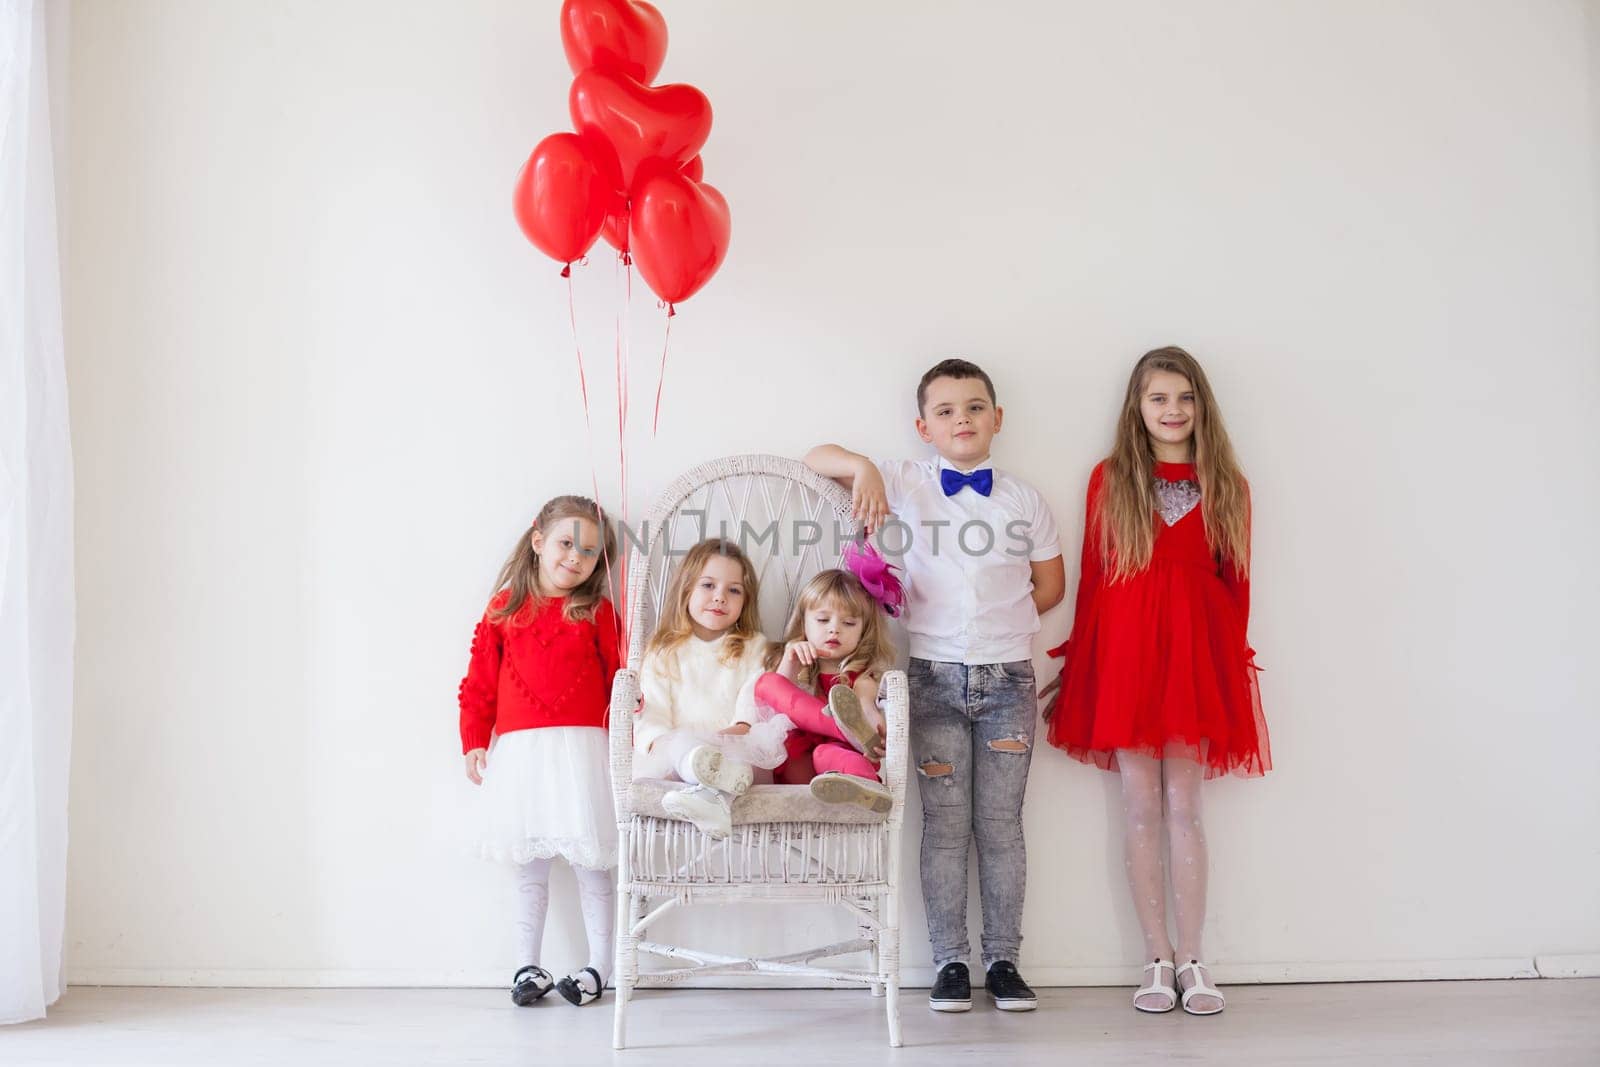 Kids with red balloons for birthday in the interior of the white room